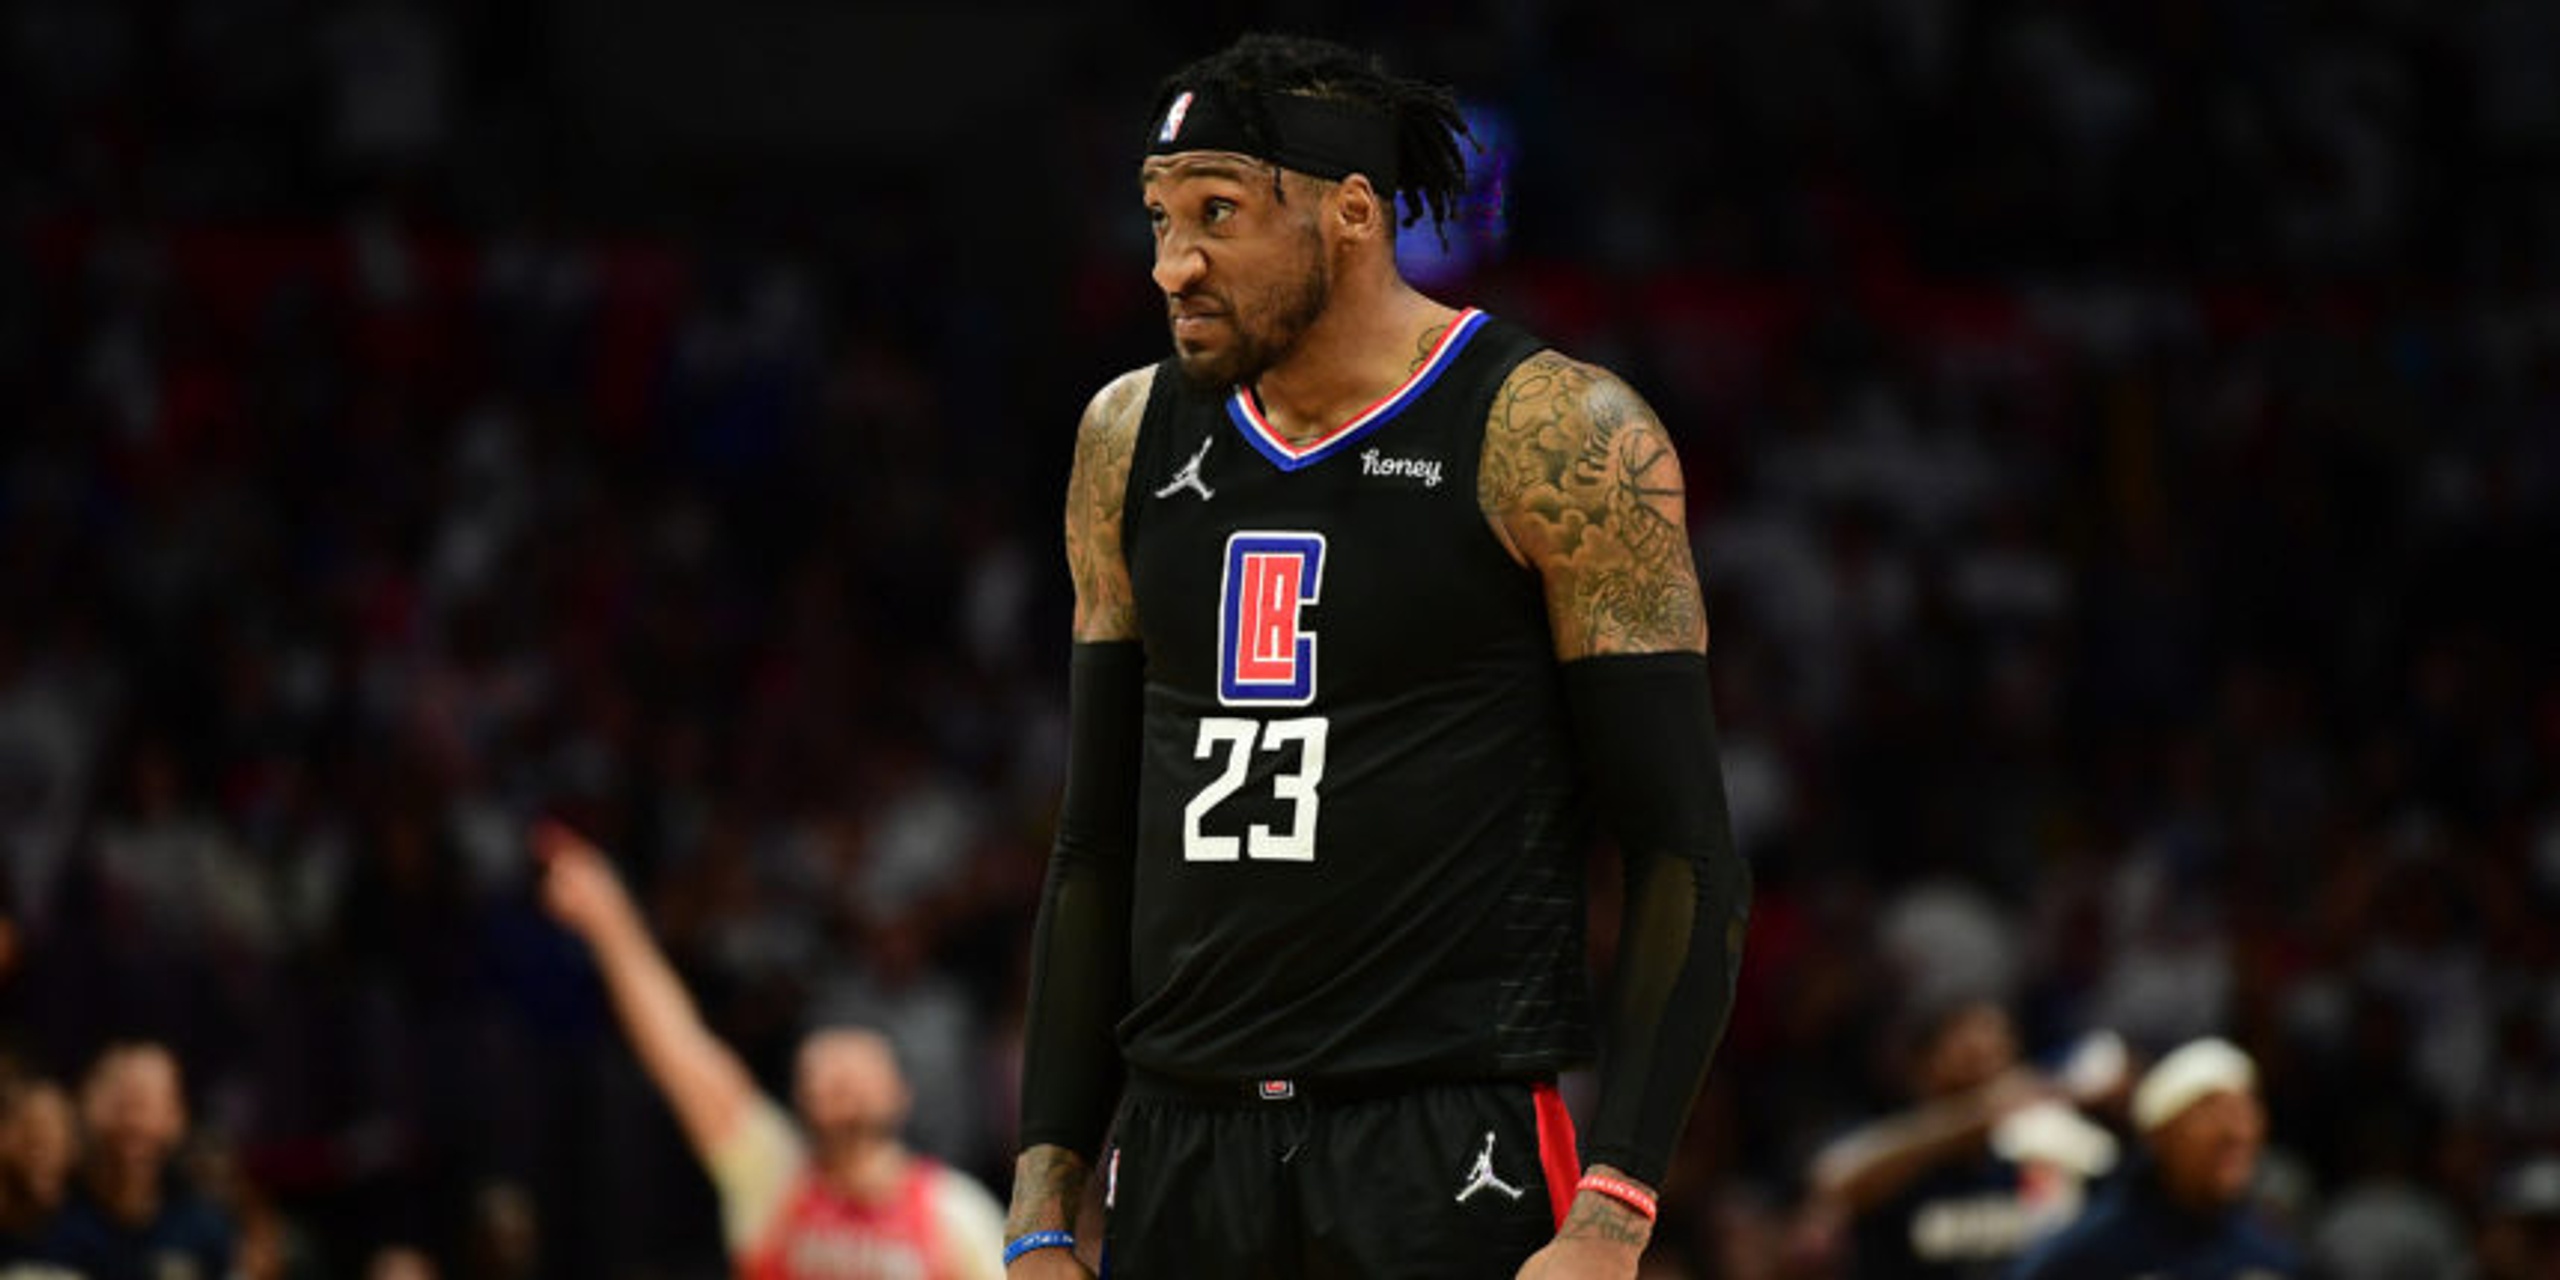 Woj: Robert Covington agrees to two-year extension with the Clippers